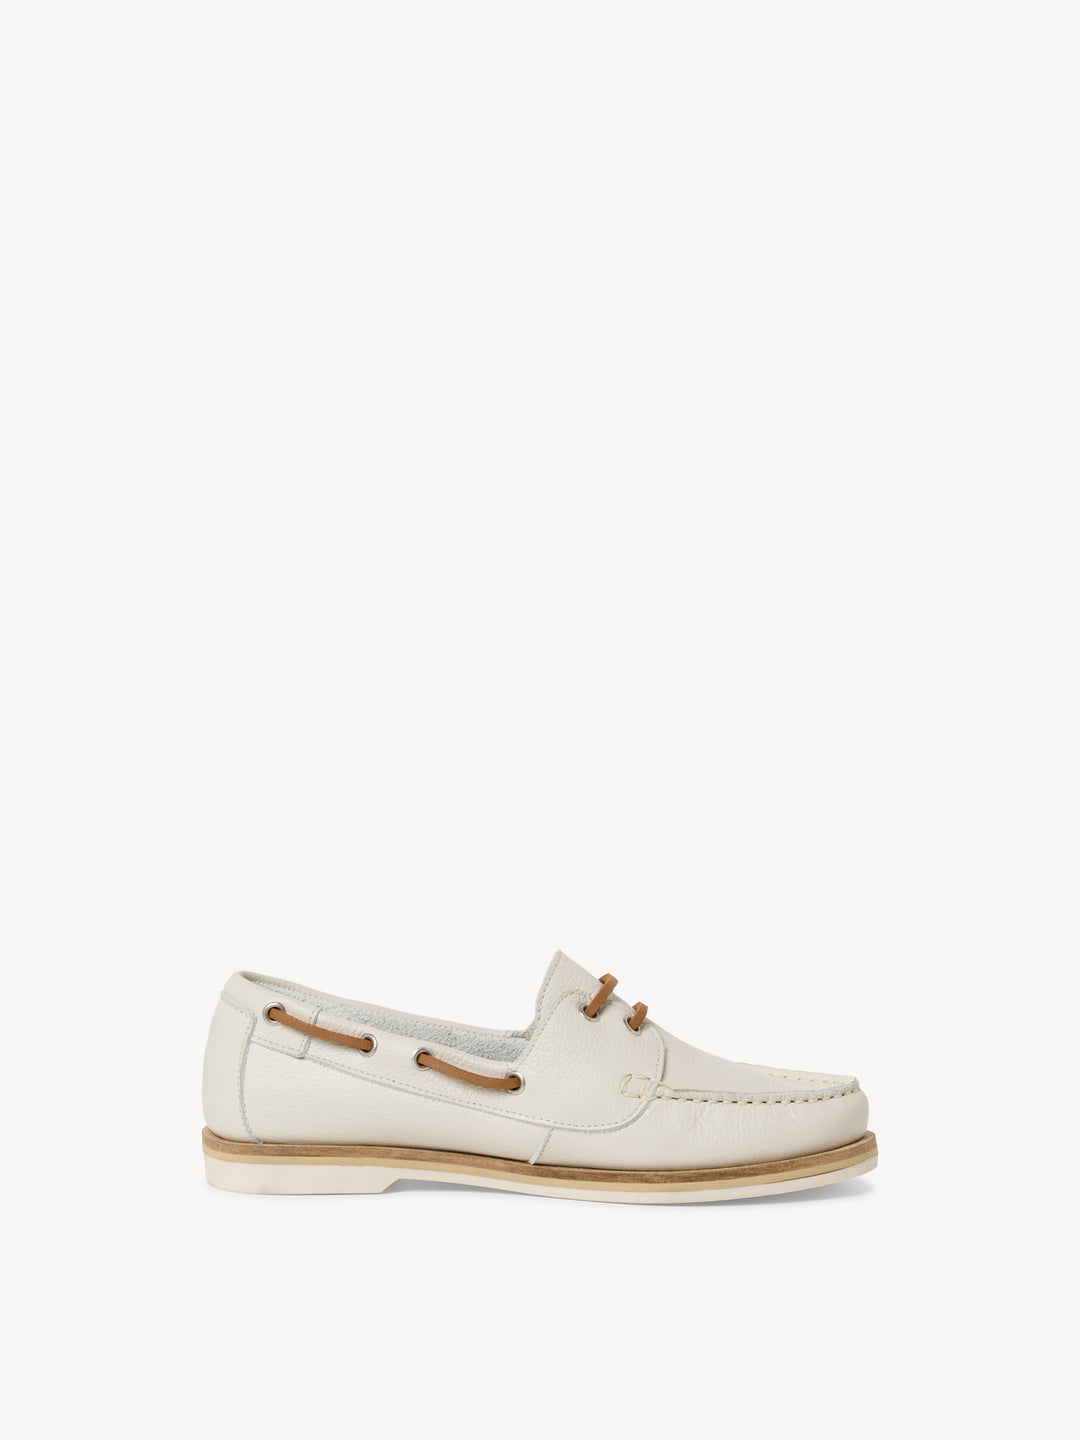 OFF WHITE LEATHER MOCCASIN